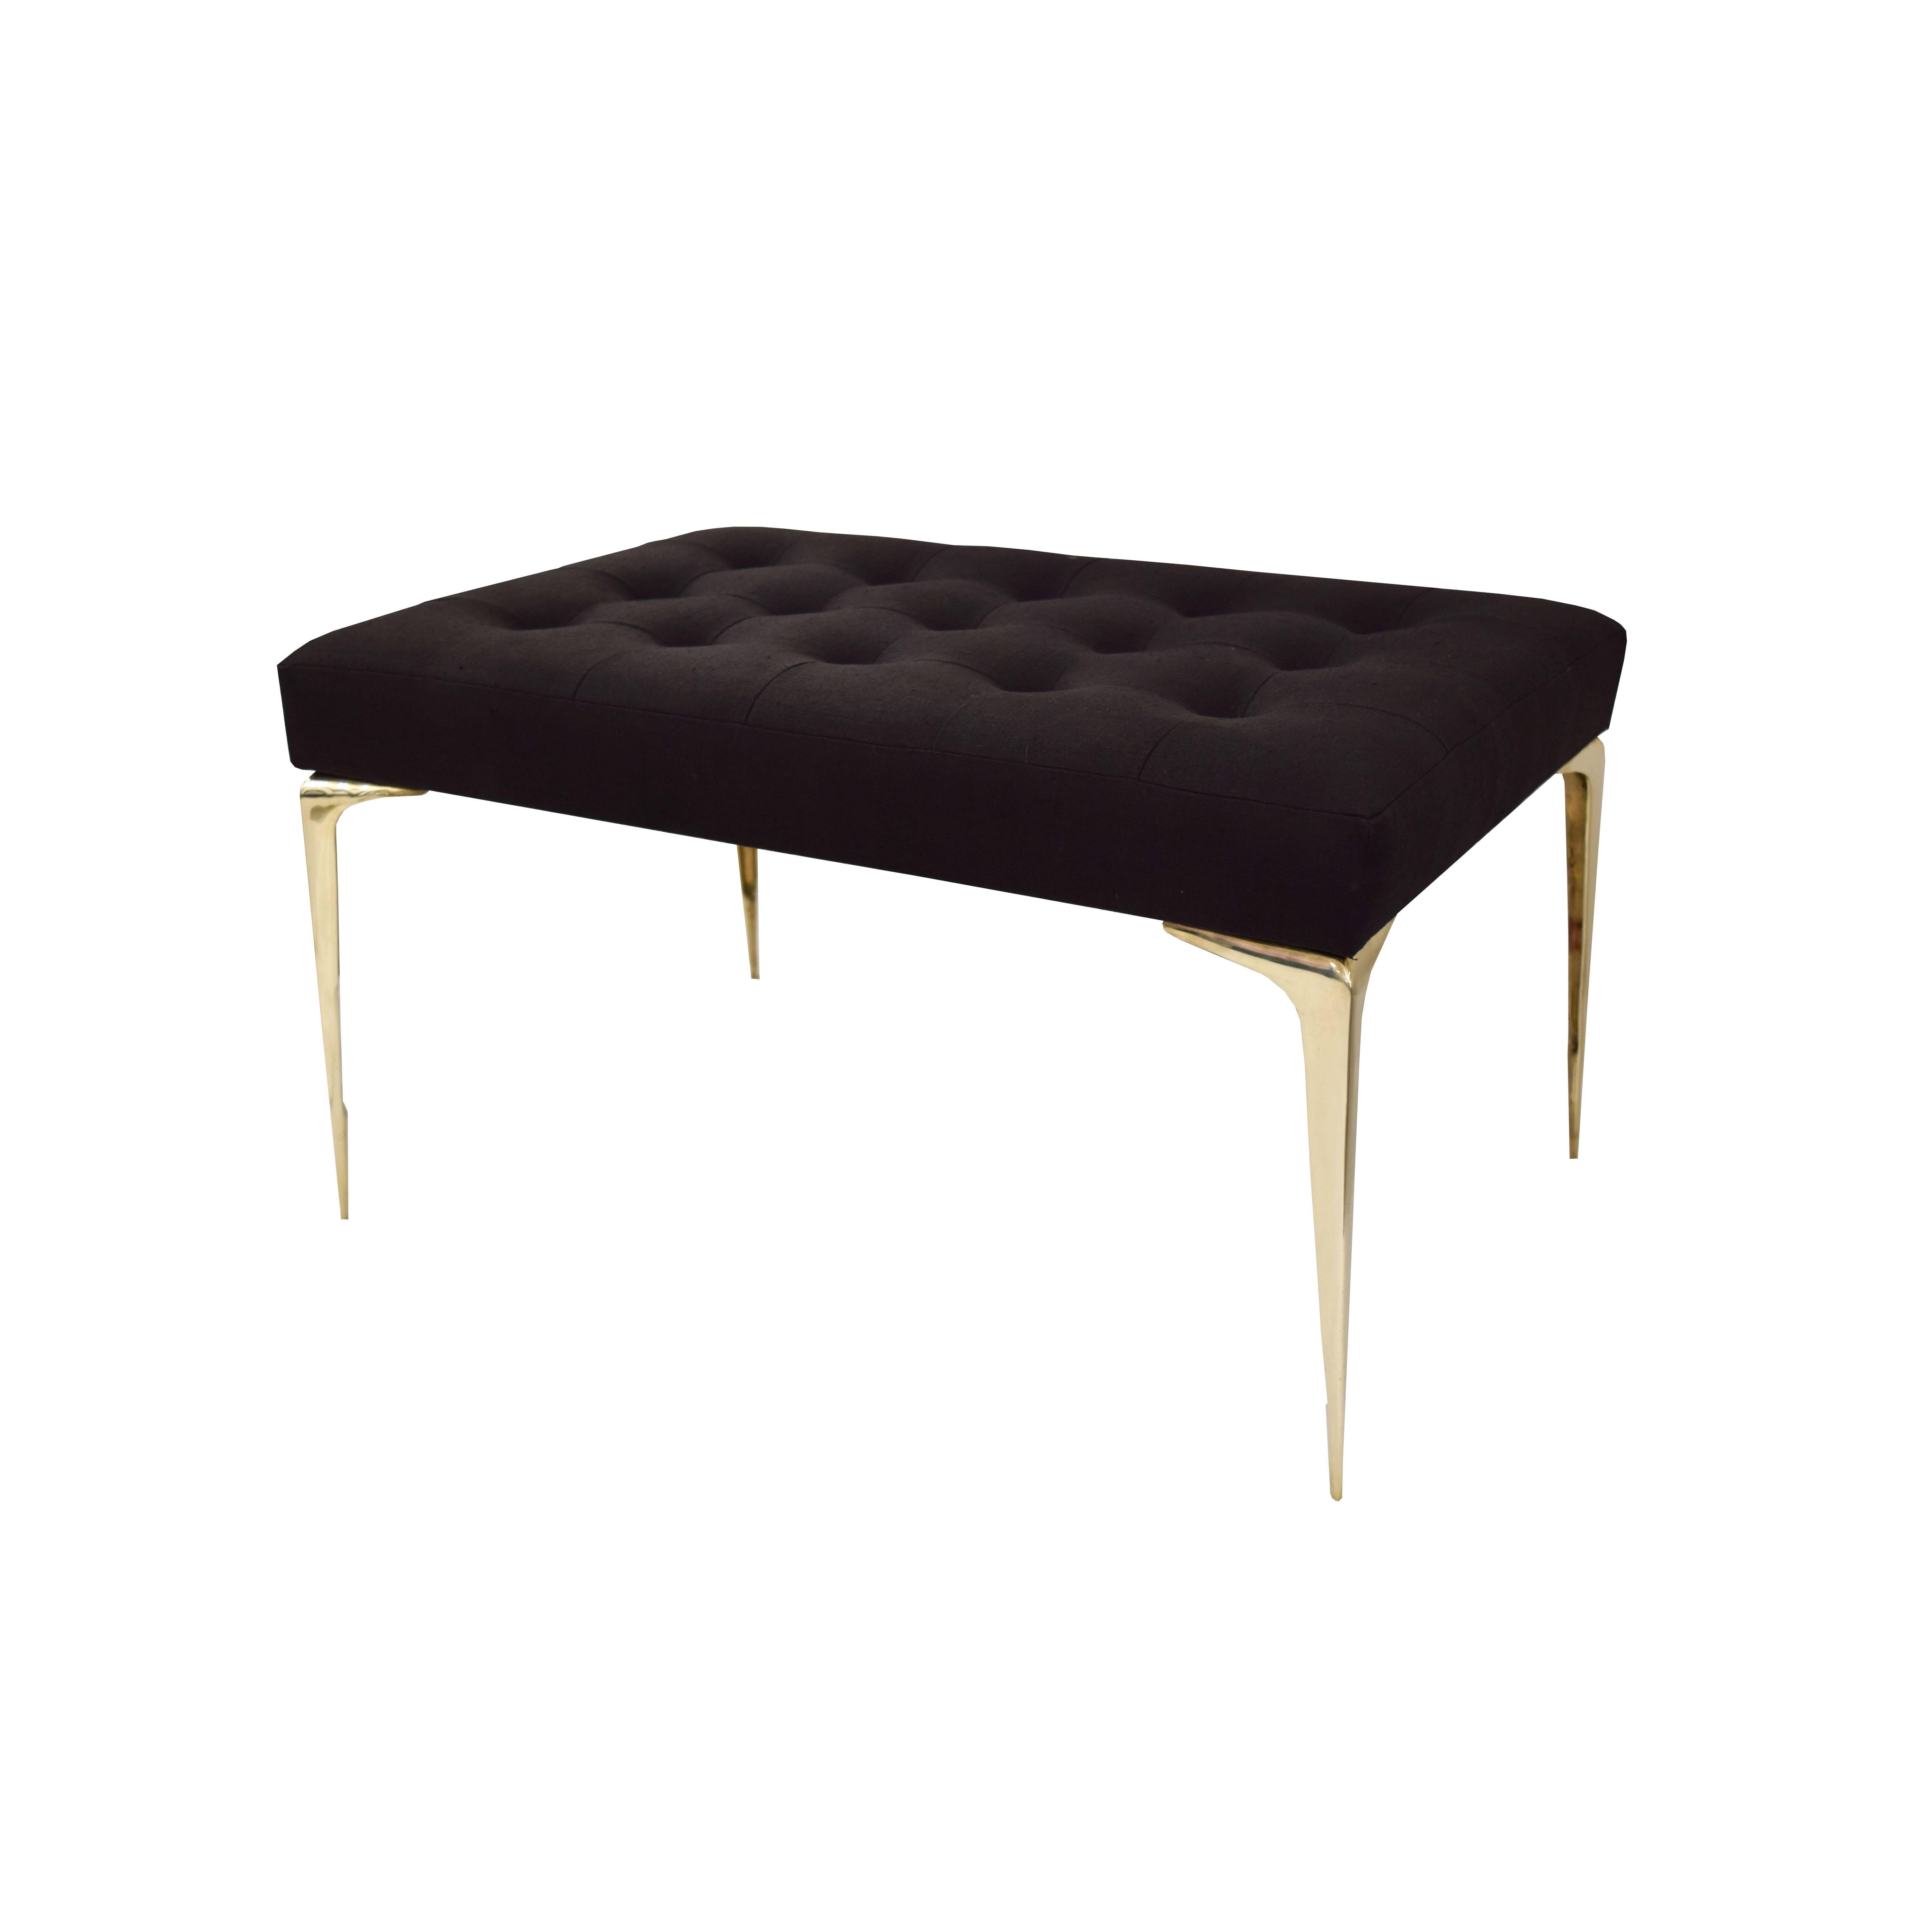 Custom Mid-Century inspired Stiletto bench designed by Irwin Feld Design for CF Modern feature hand cast and polished tapered solid brass legs. These benches are available in pairs or as singles, in custom sizes and COM.
Legs available nickel plated